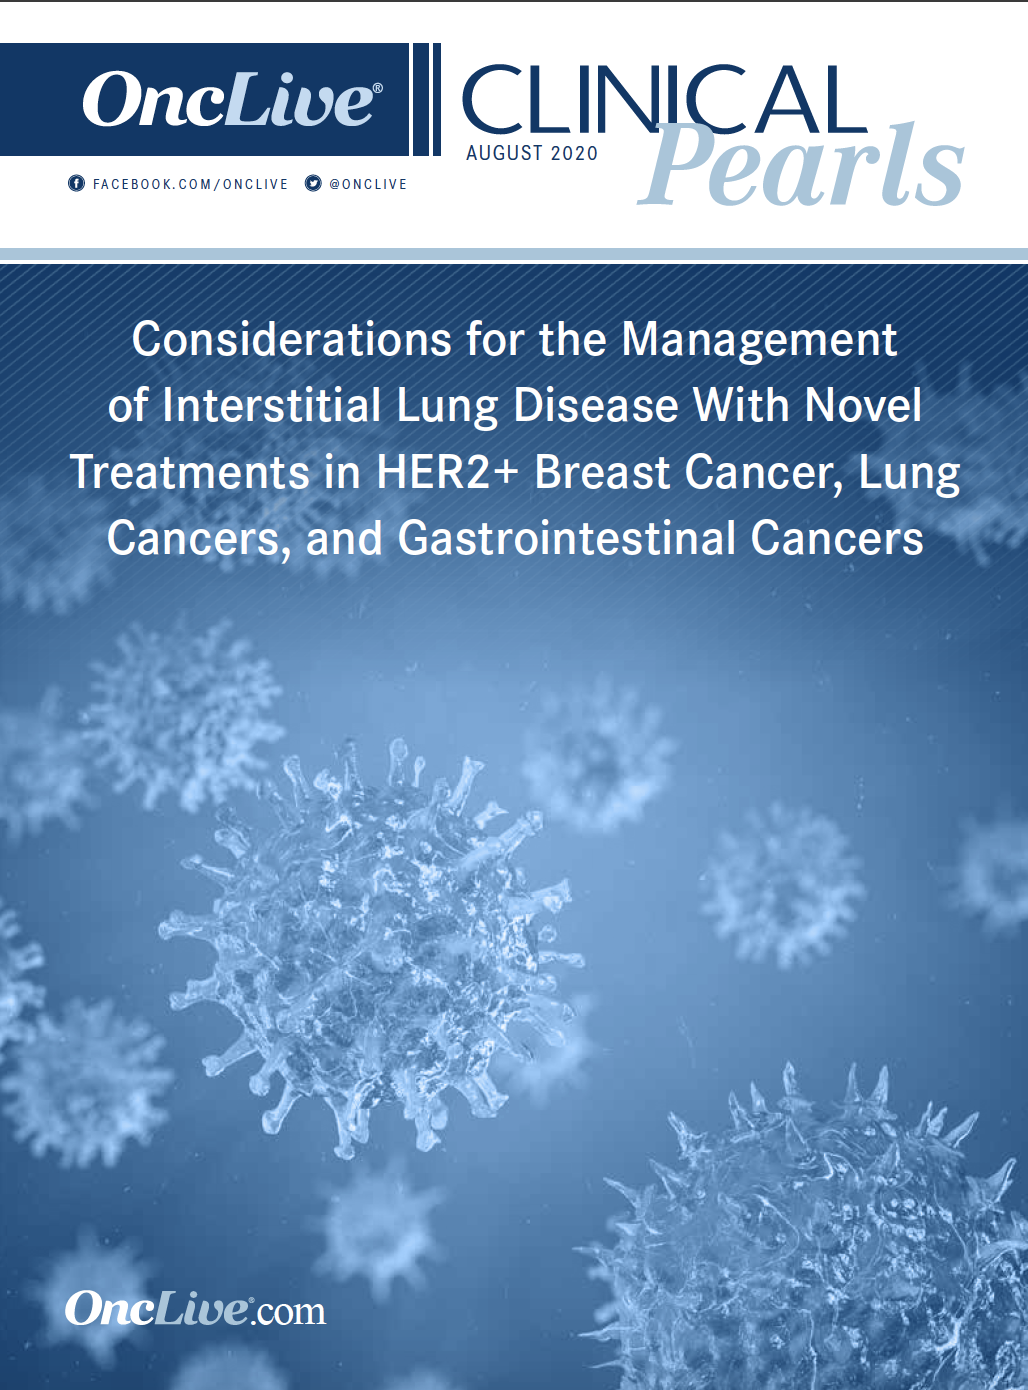 Considerations for the Management of Interstitial Lung Disease With Novel Treatments in HER2+ Breast Cancer, Lung Cancers, and Gastrointestinal Cancers